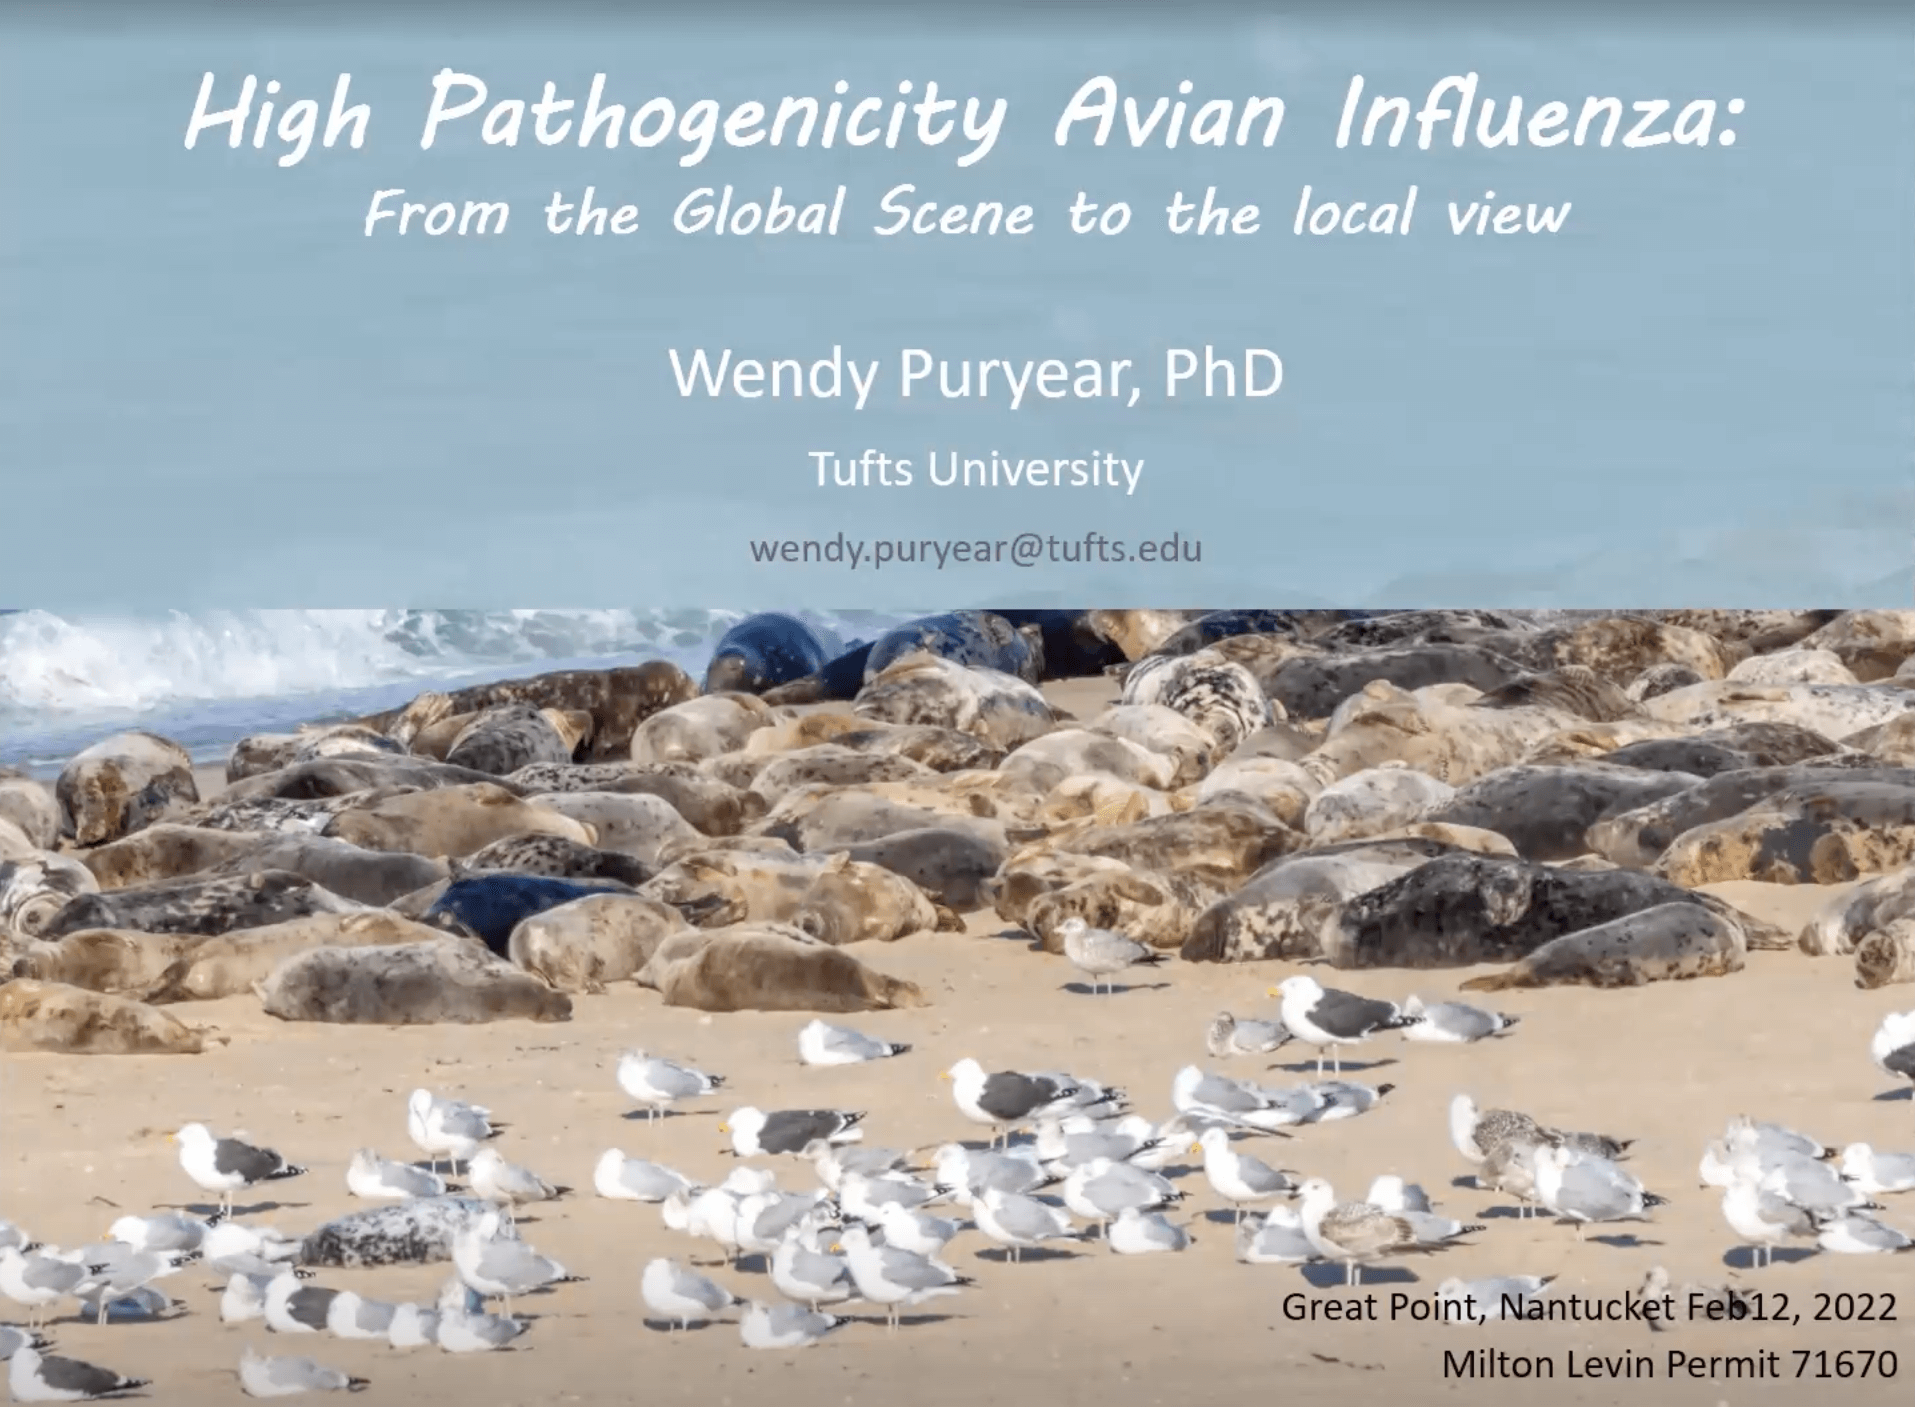 HPAI Avian Flu, from the Global Scene to Local View